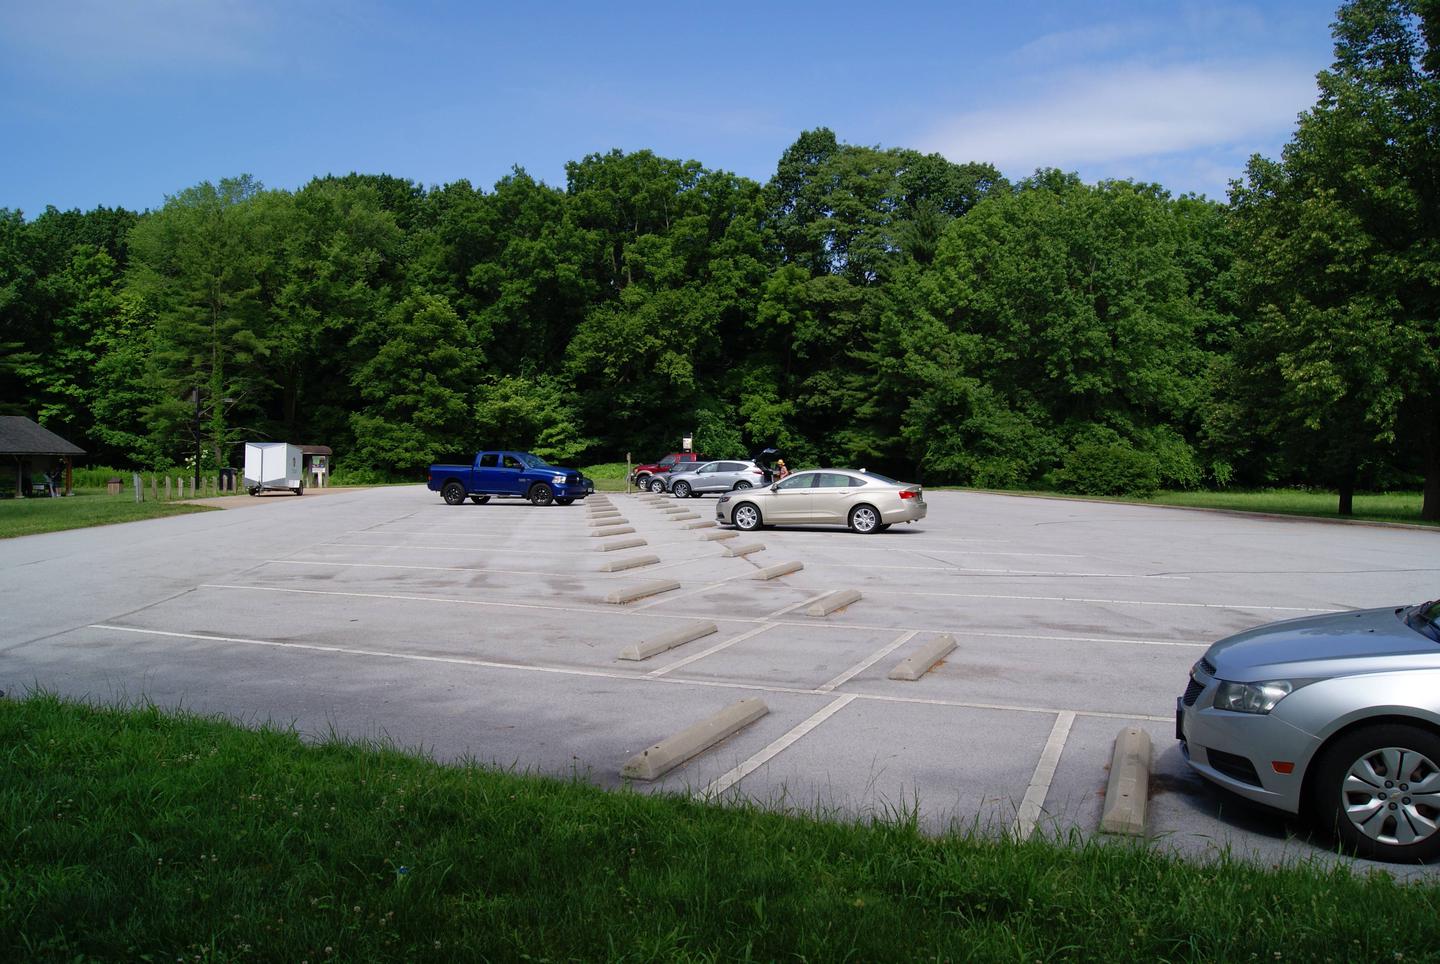 Parking Area for shelters 2 and 3 in the Chellberg Farm AreaChellber Farm Picnic area parking lot.